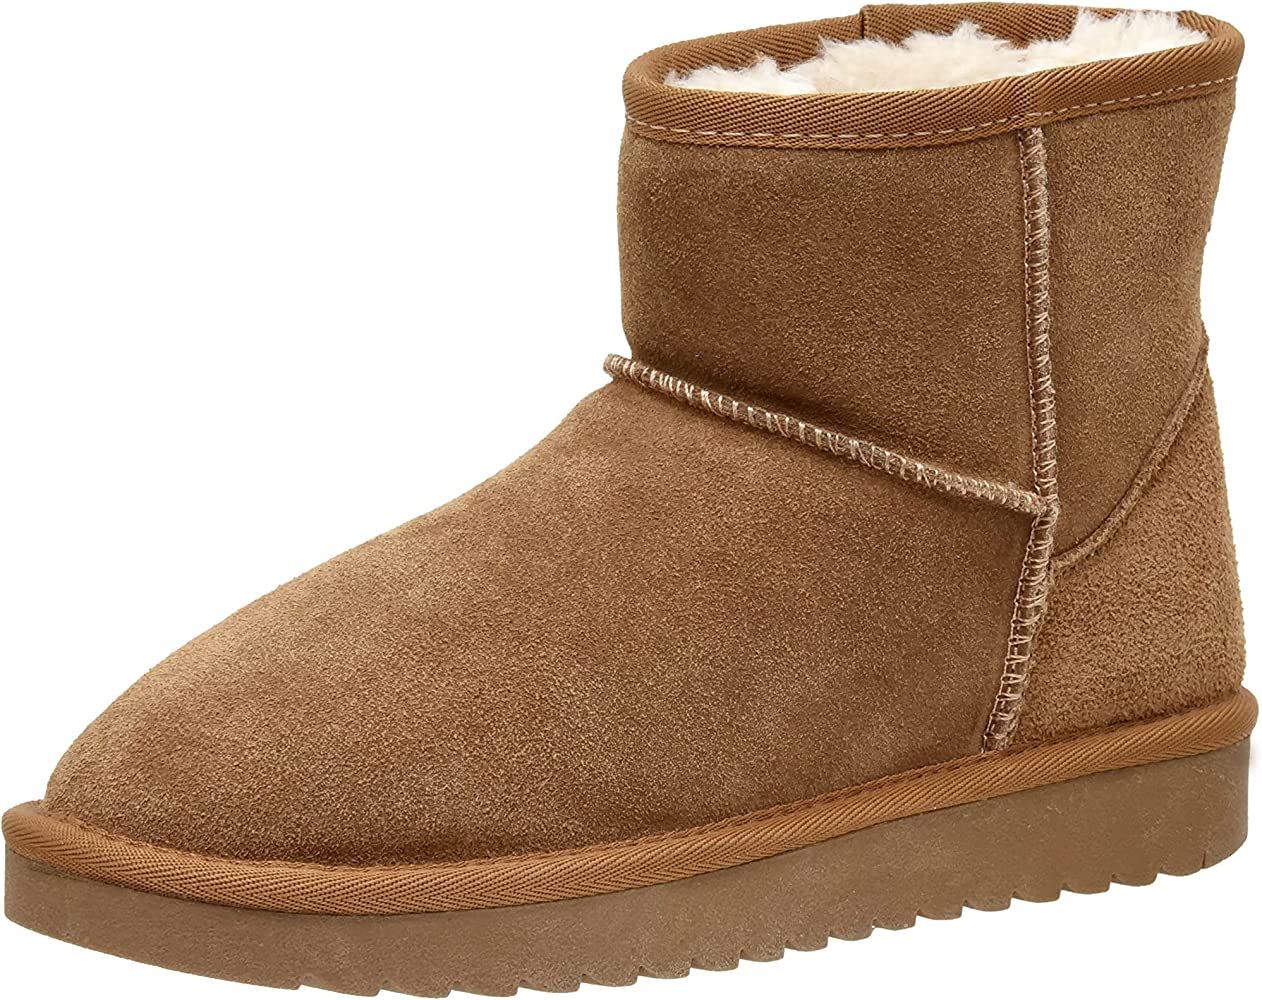 CUSHIONAIRE Women's Hipster pull on boot +Memory Foam | Amazon (US)